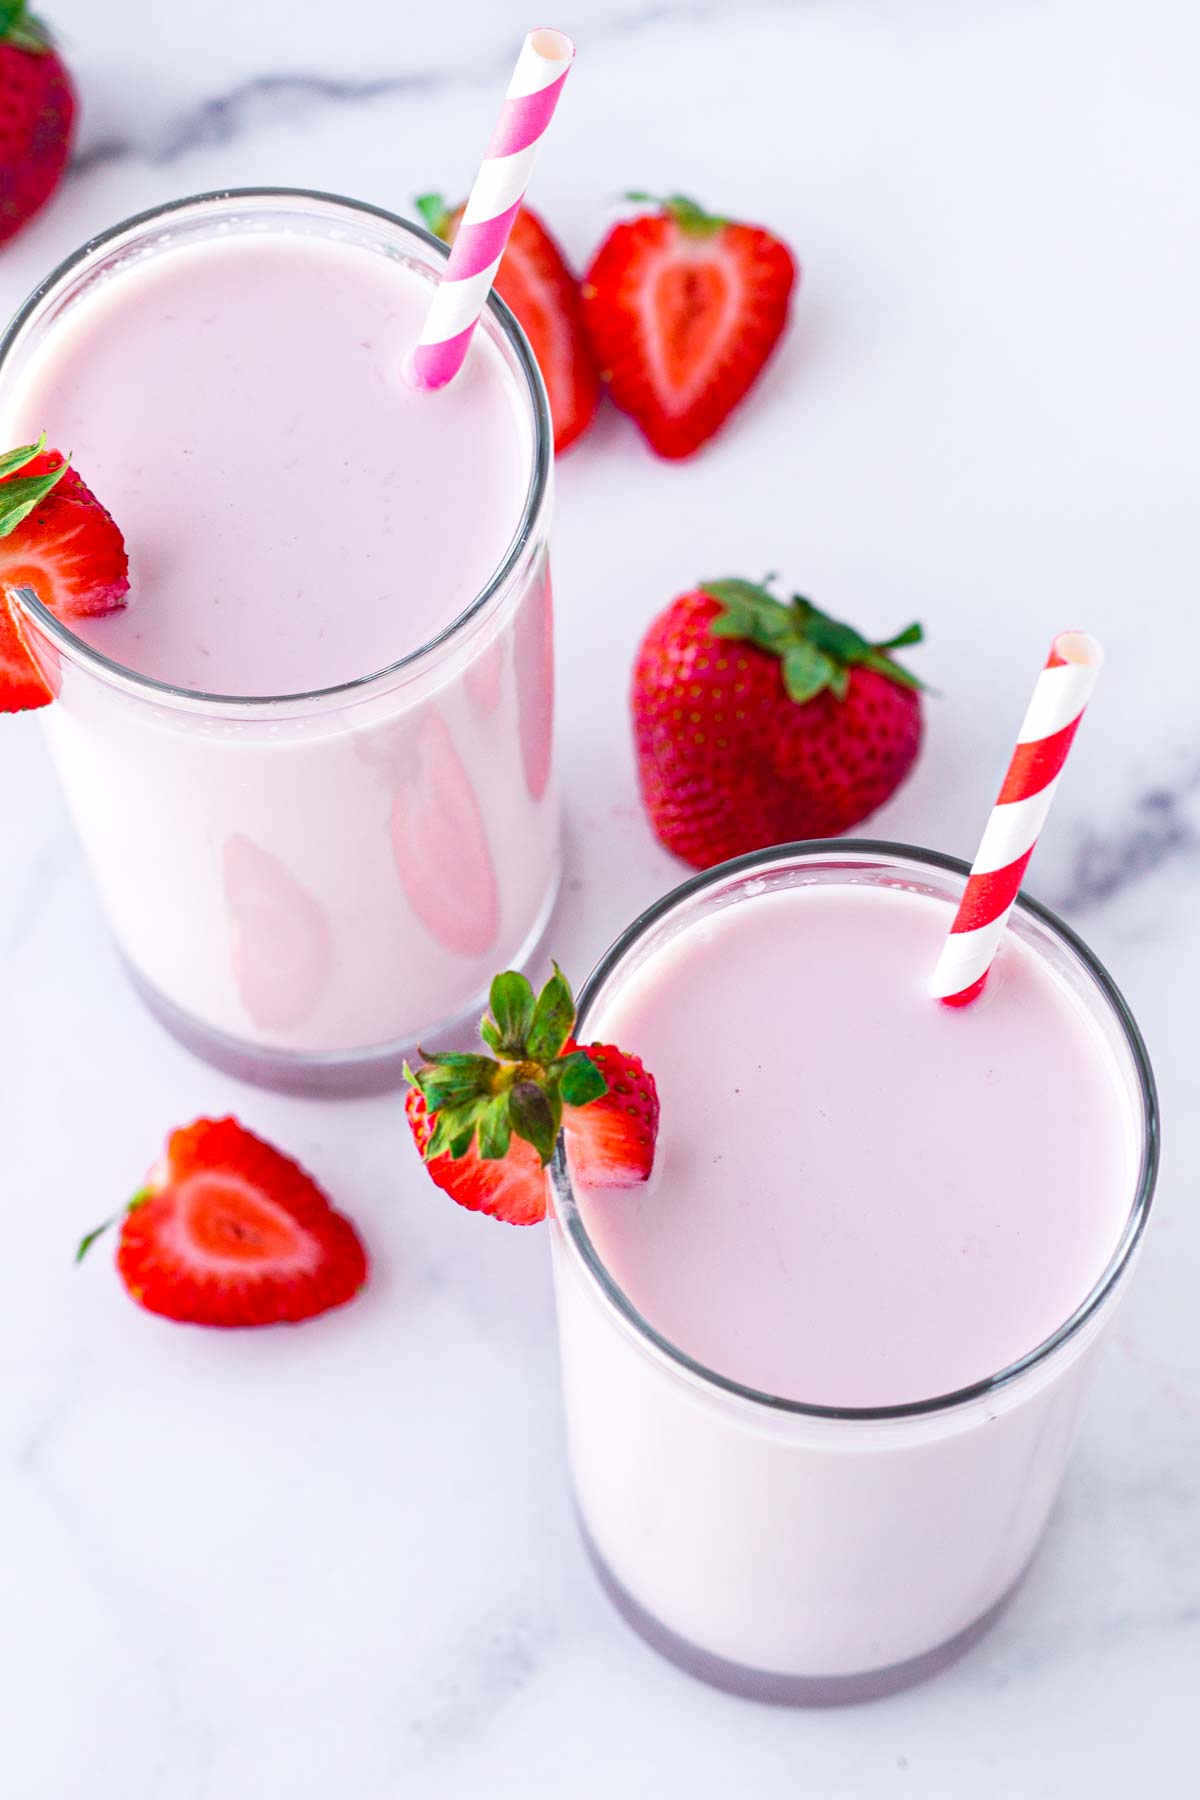 top view of two glasses of strawberry milk with paper straws